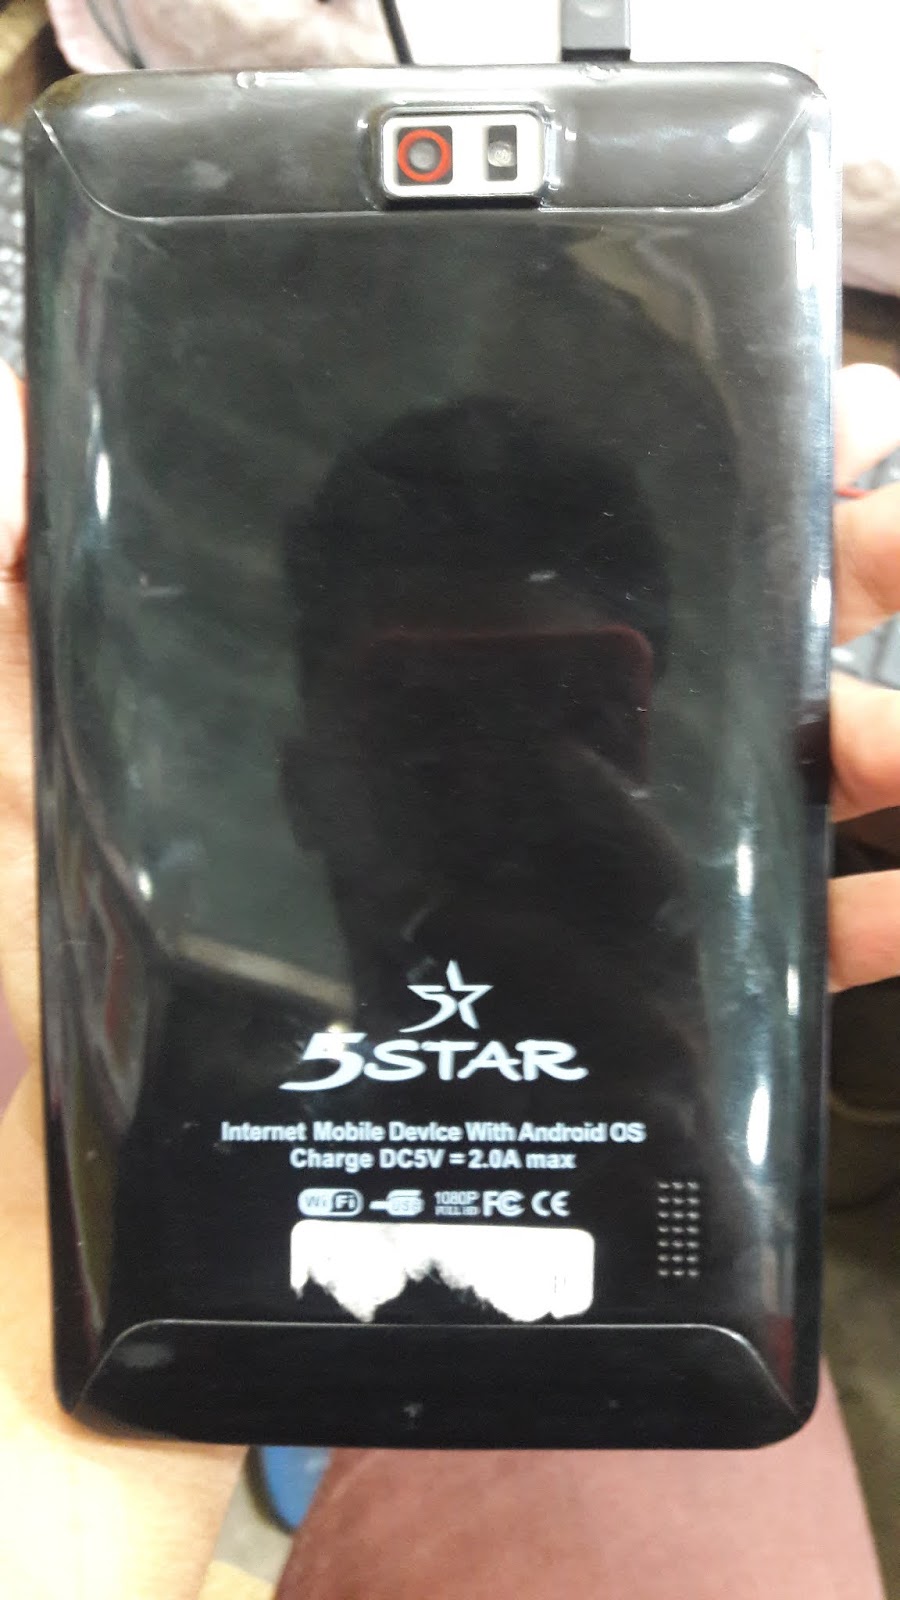 5Star ZX23 flash file / LCD Fix [ FRP Lock Fix ] Dead Recovery Solution